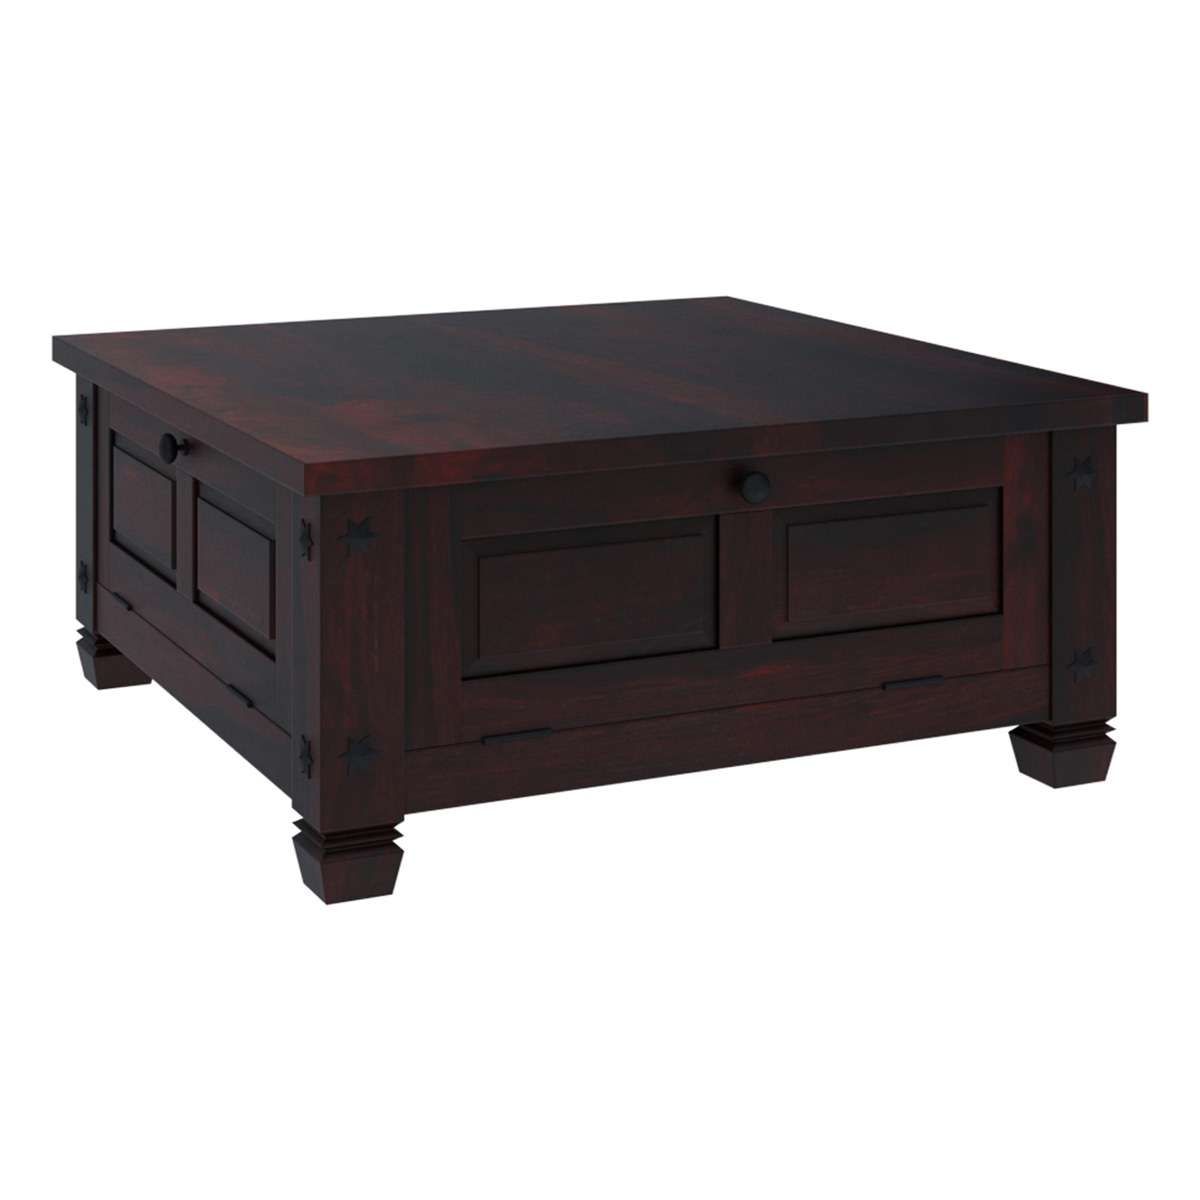 Well Liked Solid Oak Coffee Table With Storage Regarding Solid Wood 4 Doors Square Rustic Coffee Table With Storage (Gallery 19 of 20)